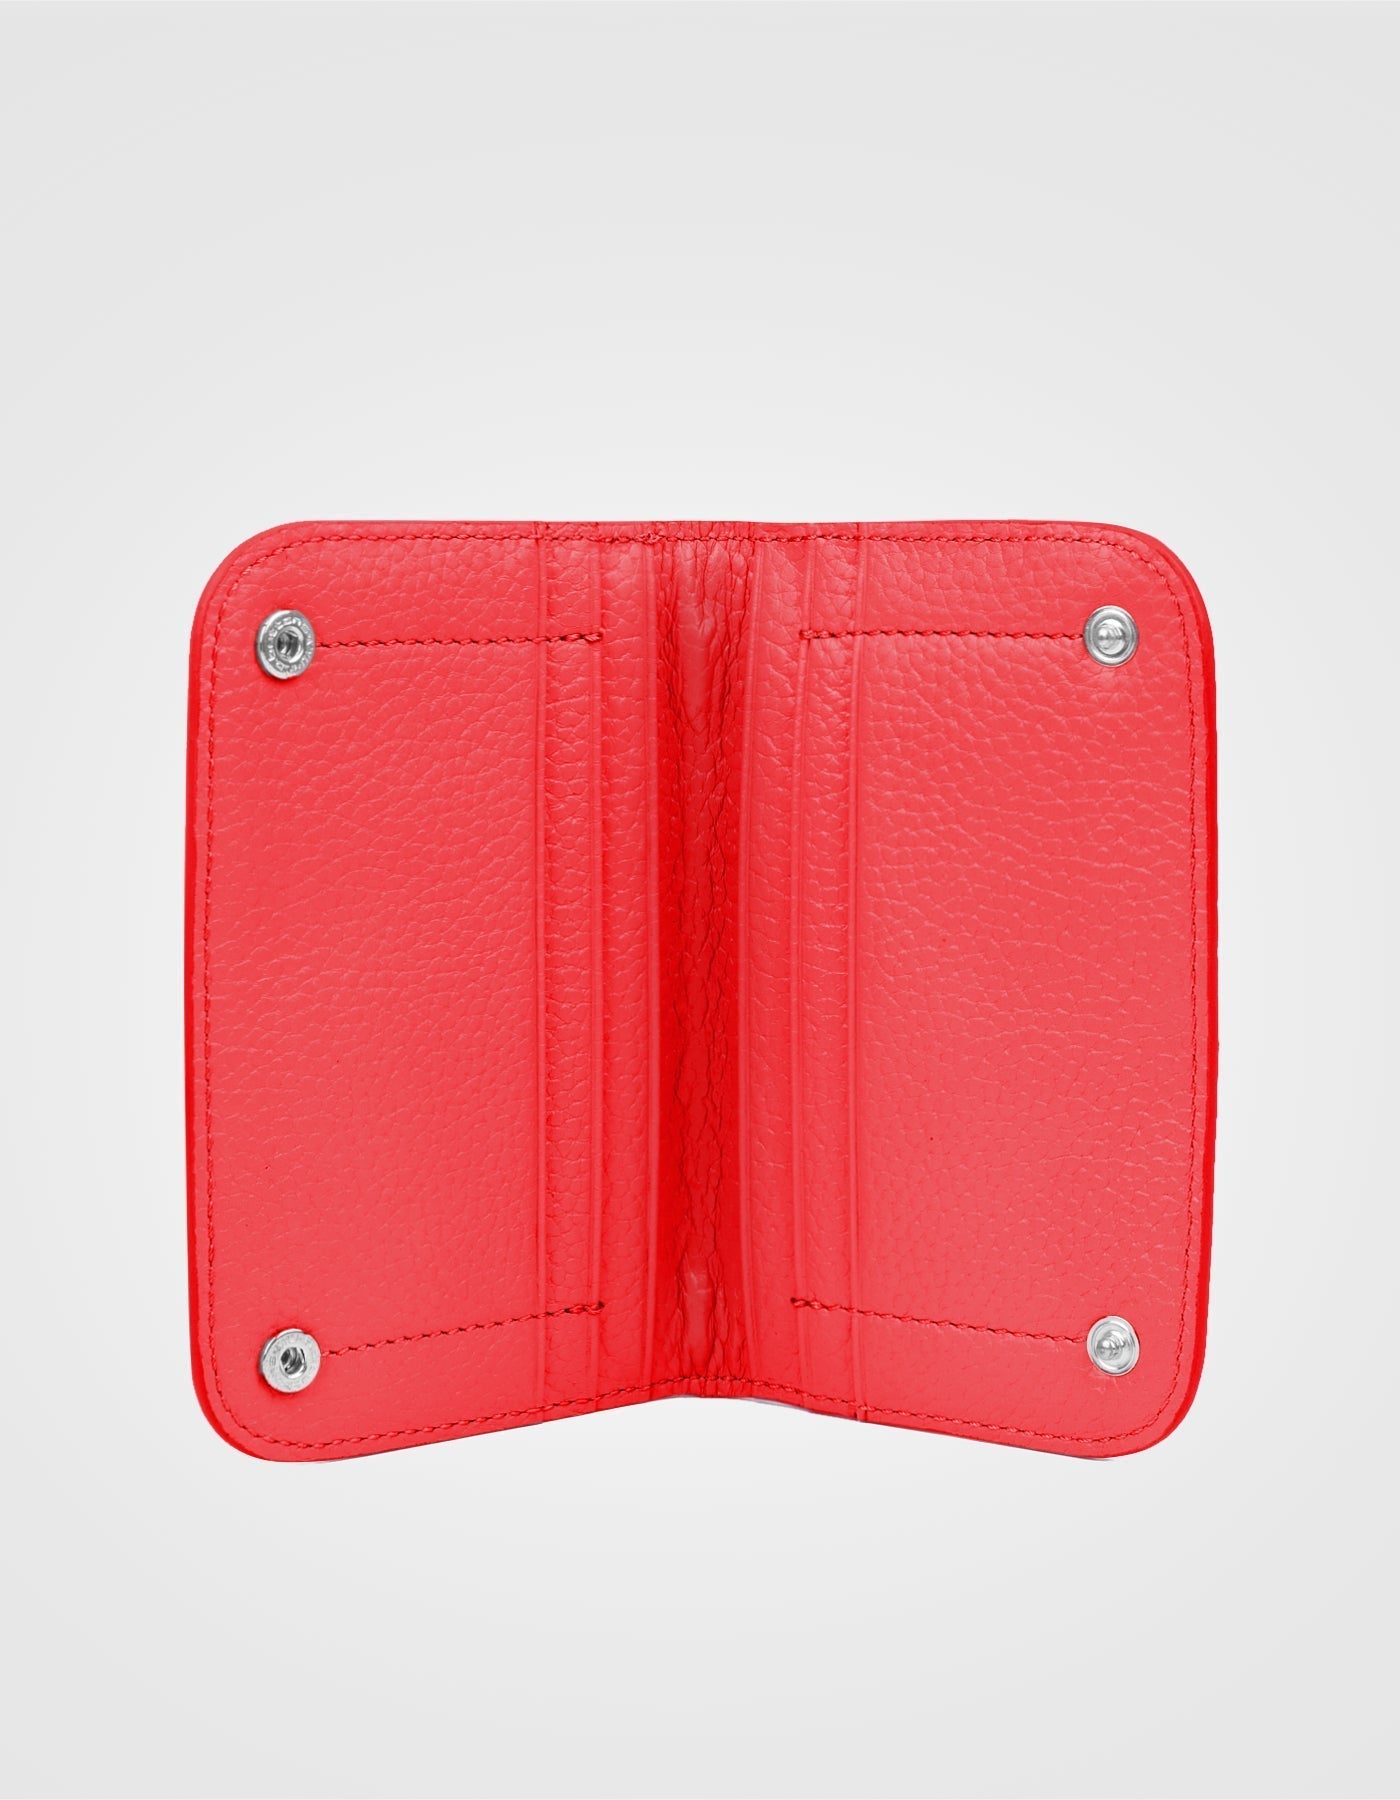 Hiva Atelier - Alae Coin Purse & Card Holder Red